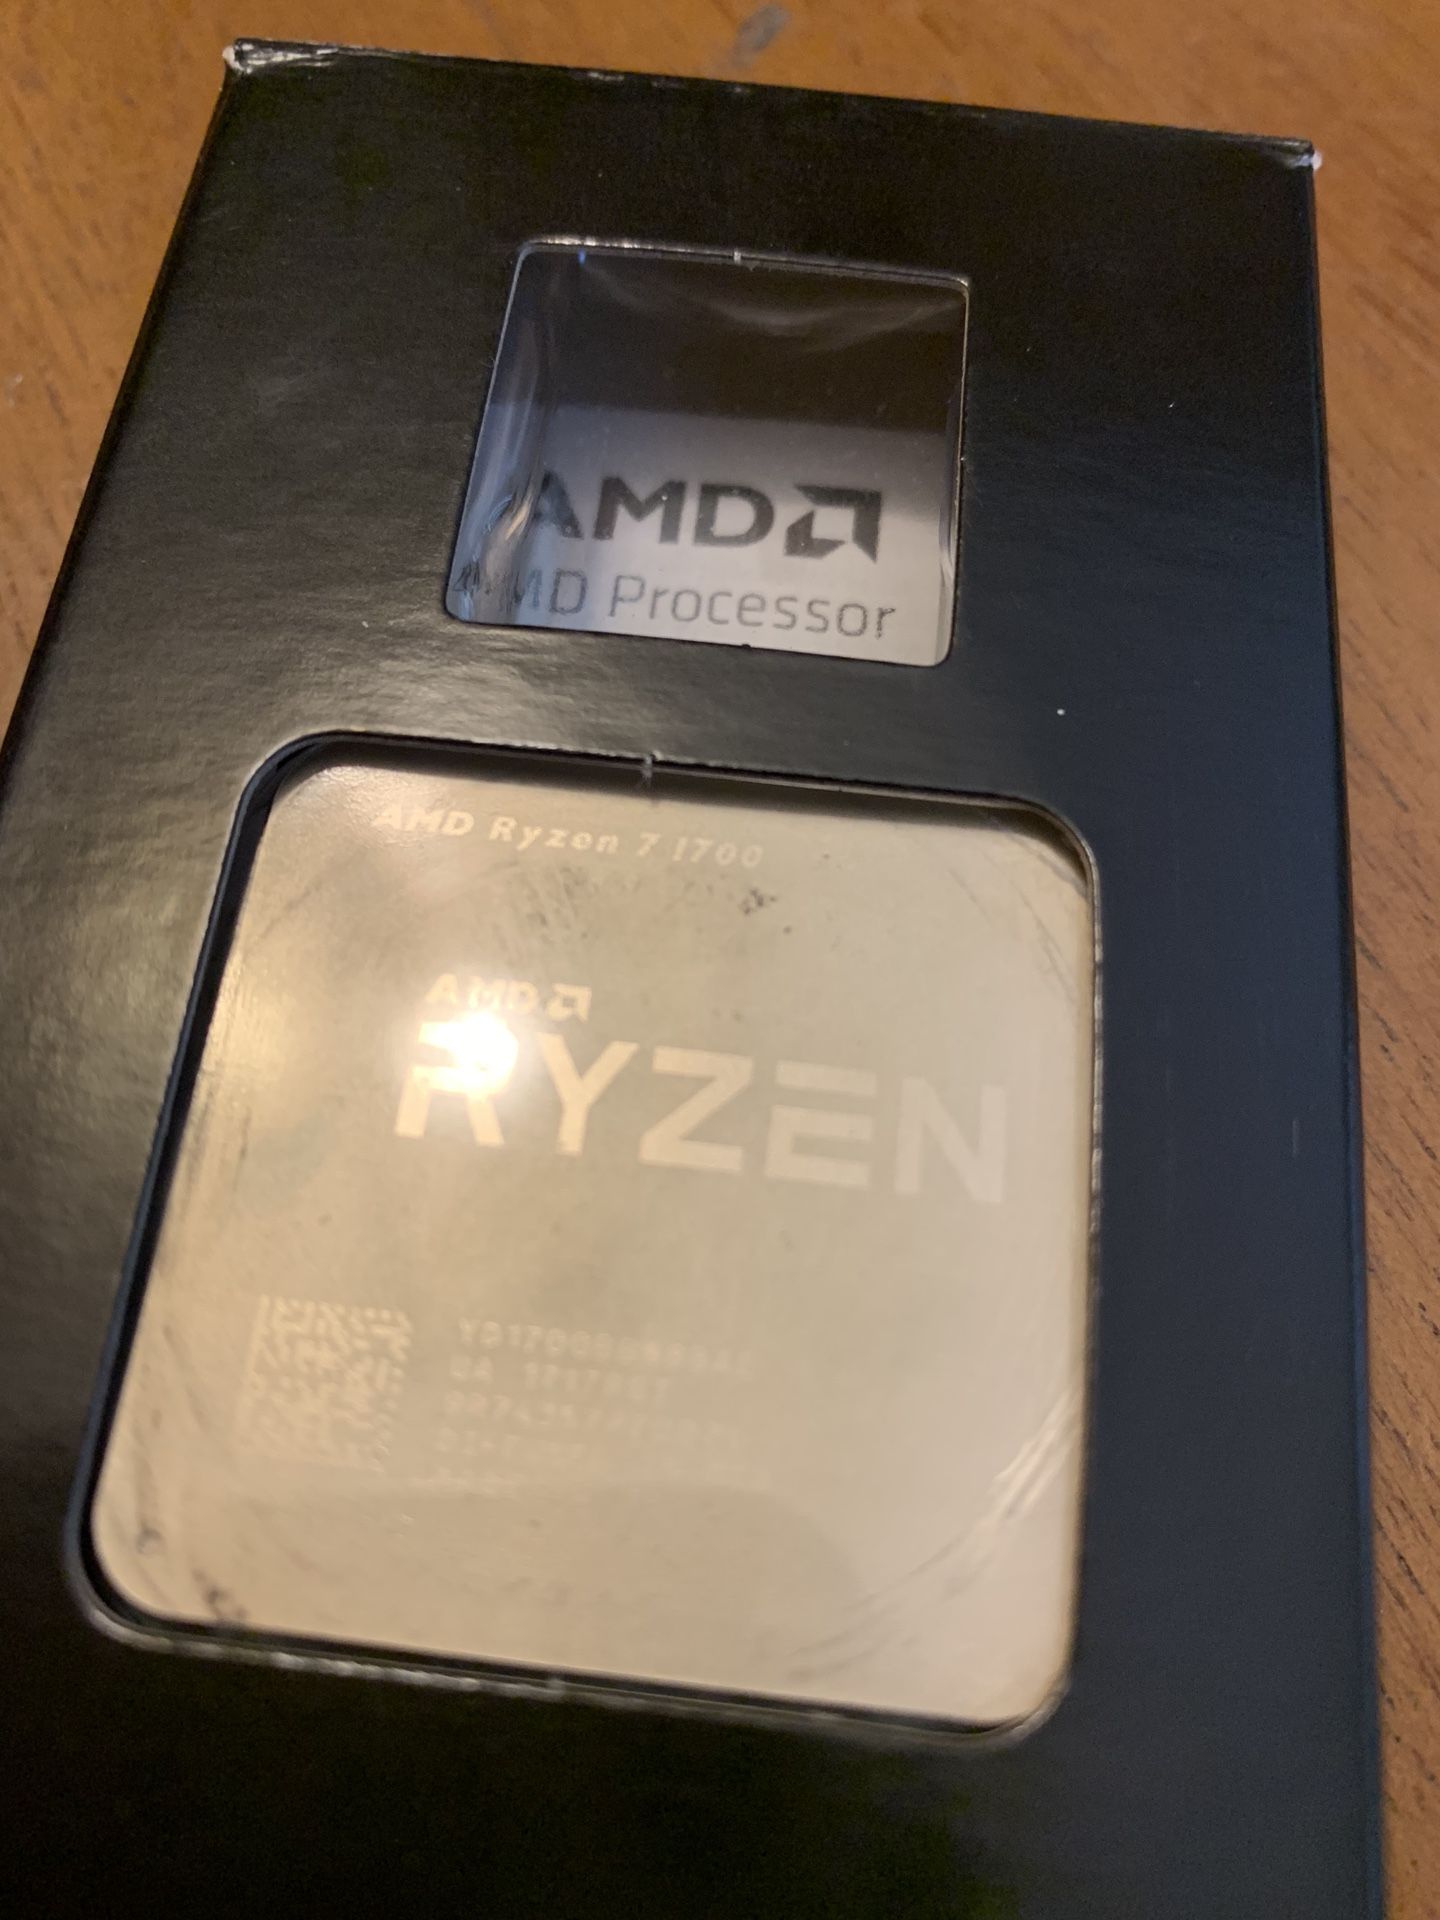 Amd ryzen 1700 with led cooler - $90 OBO